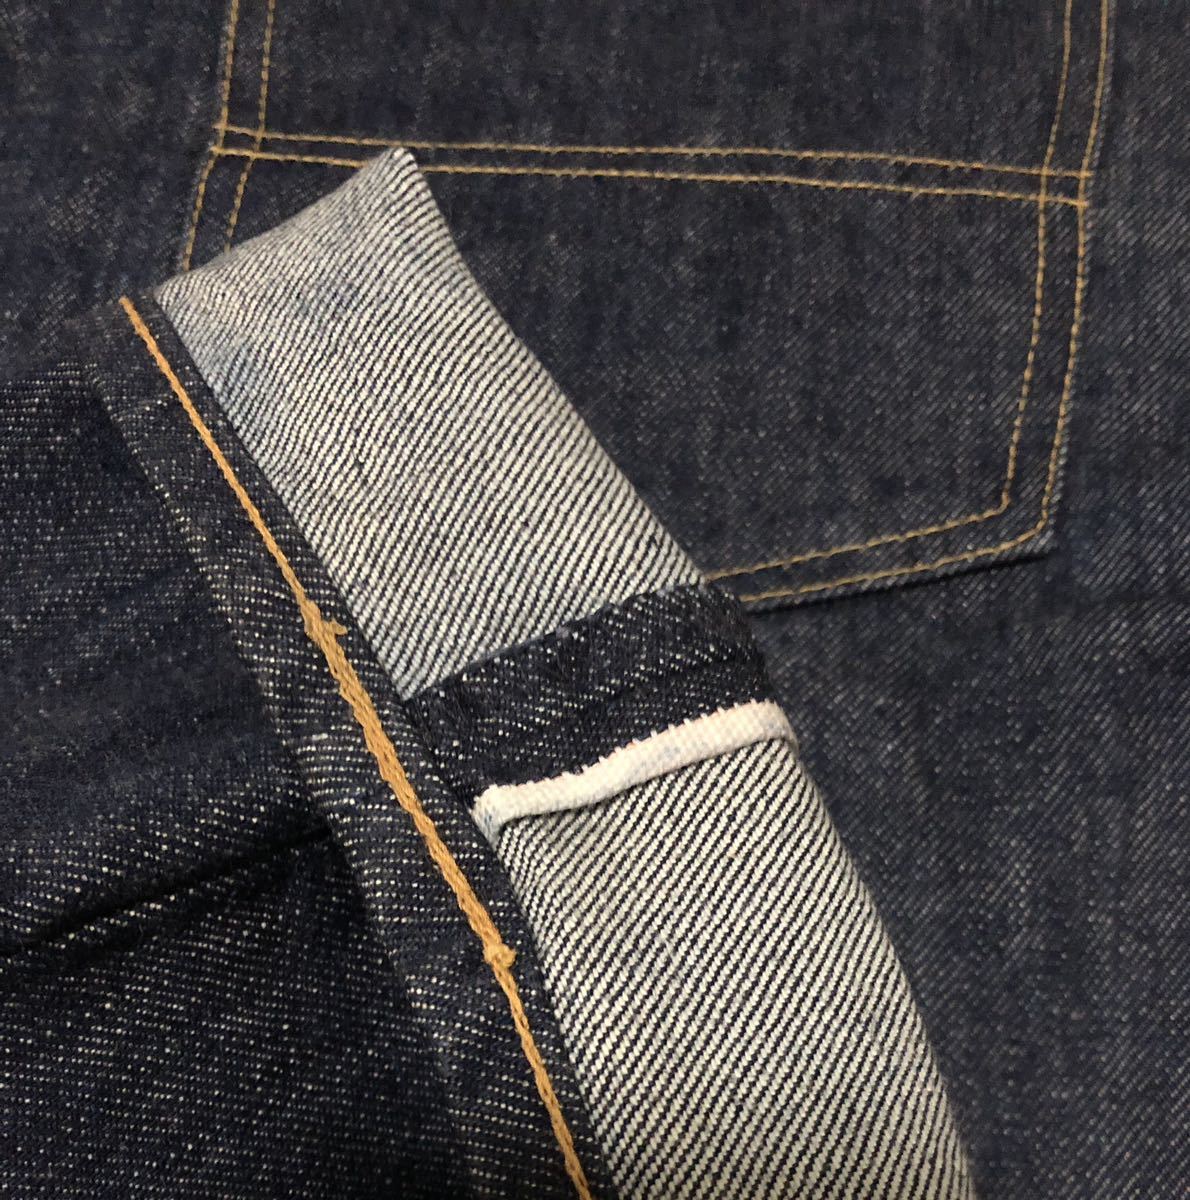 50's 濃紺PENNY'S FOREMOST 5POCKET JEANS W32/片耳！ペニーズ1WASH？の画像2